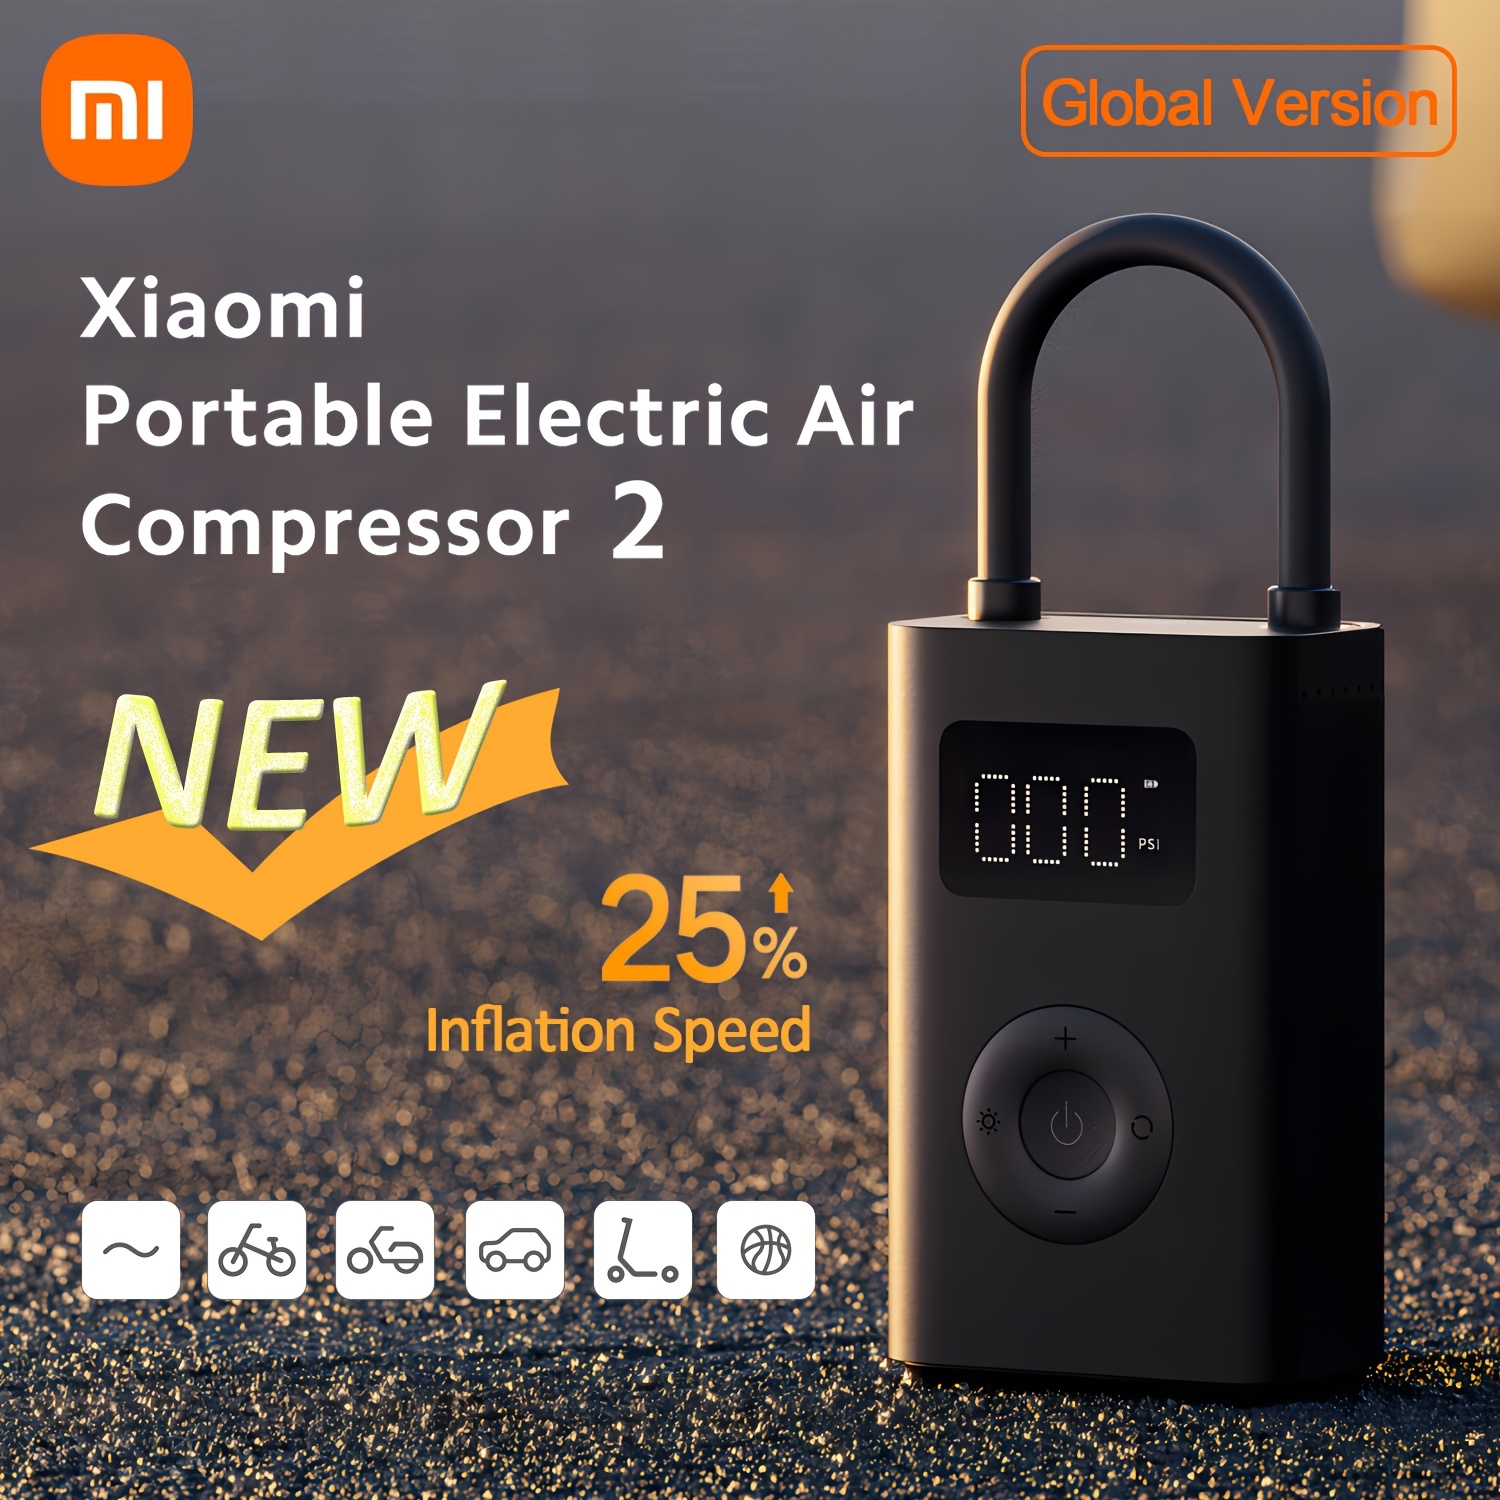 xiaomi-portable-electric-air-compressor-2 - Specifications - Mi Global Home